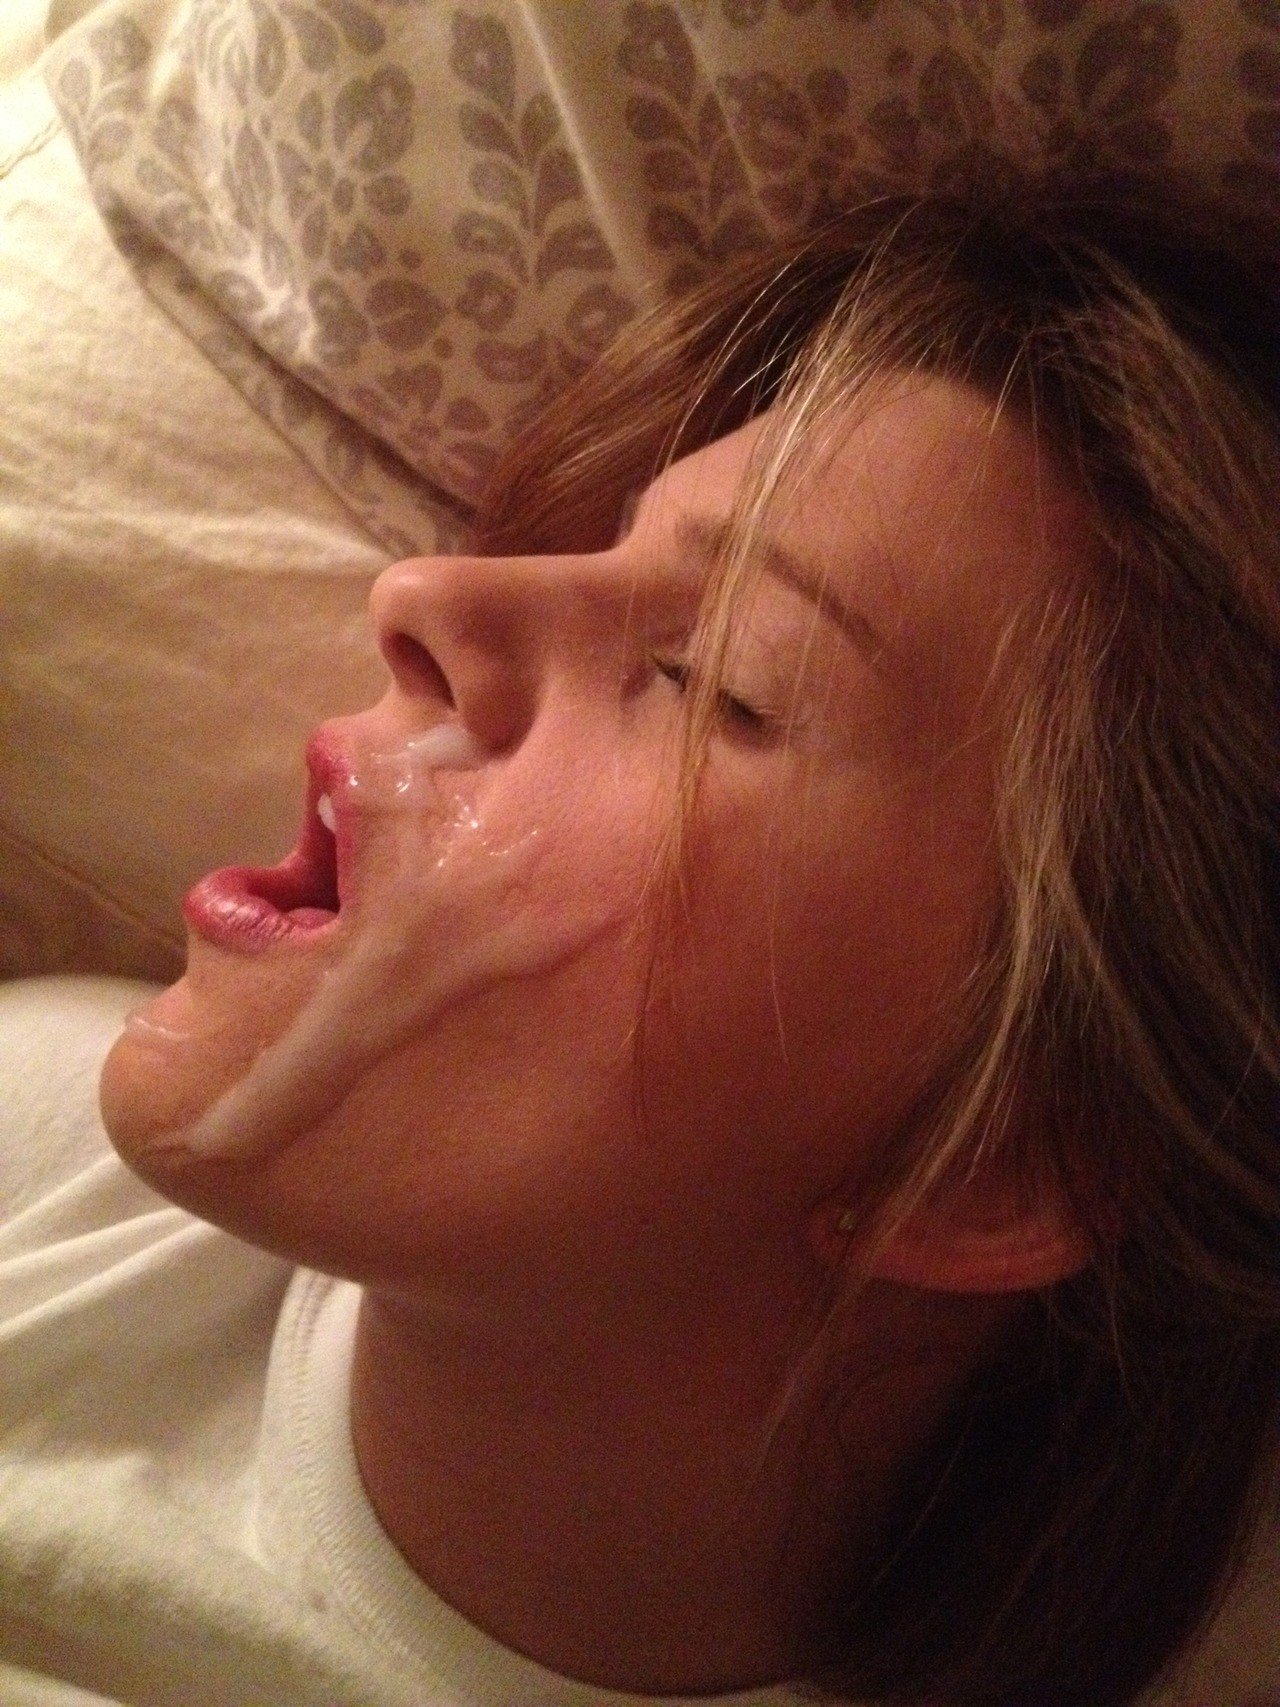 Why We Love Amateur Facial Compilations pic